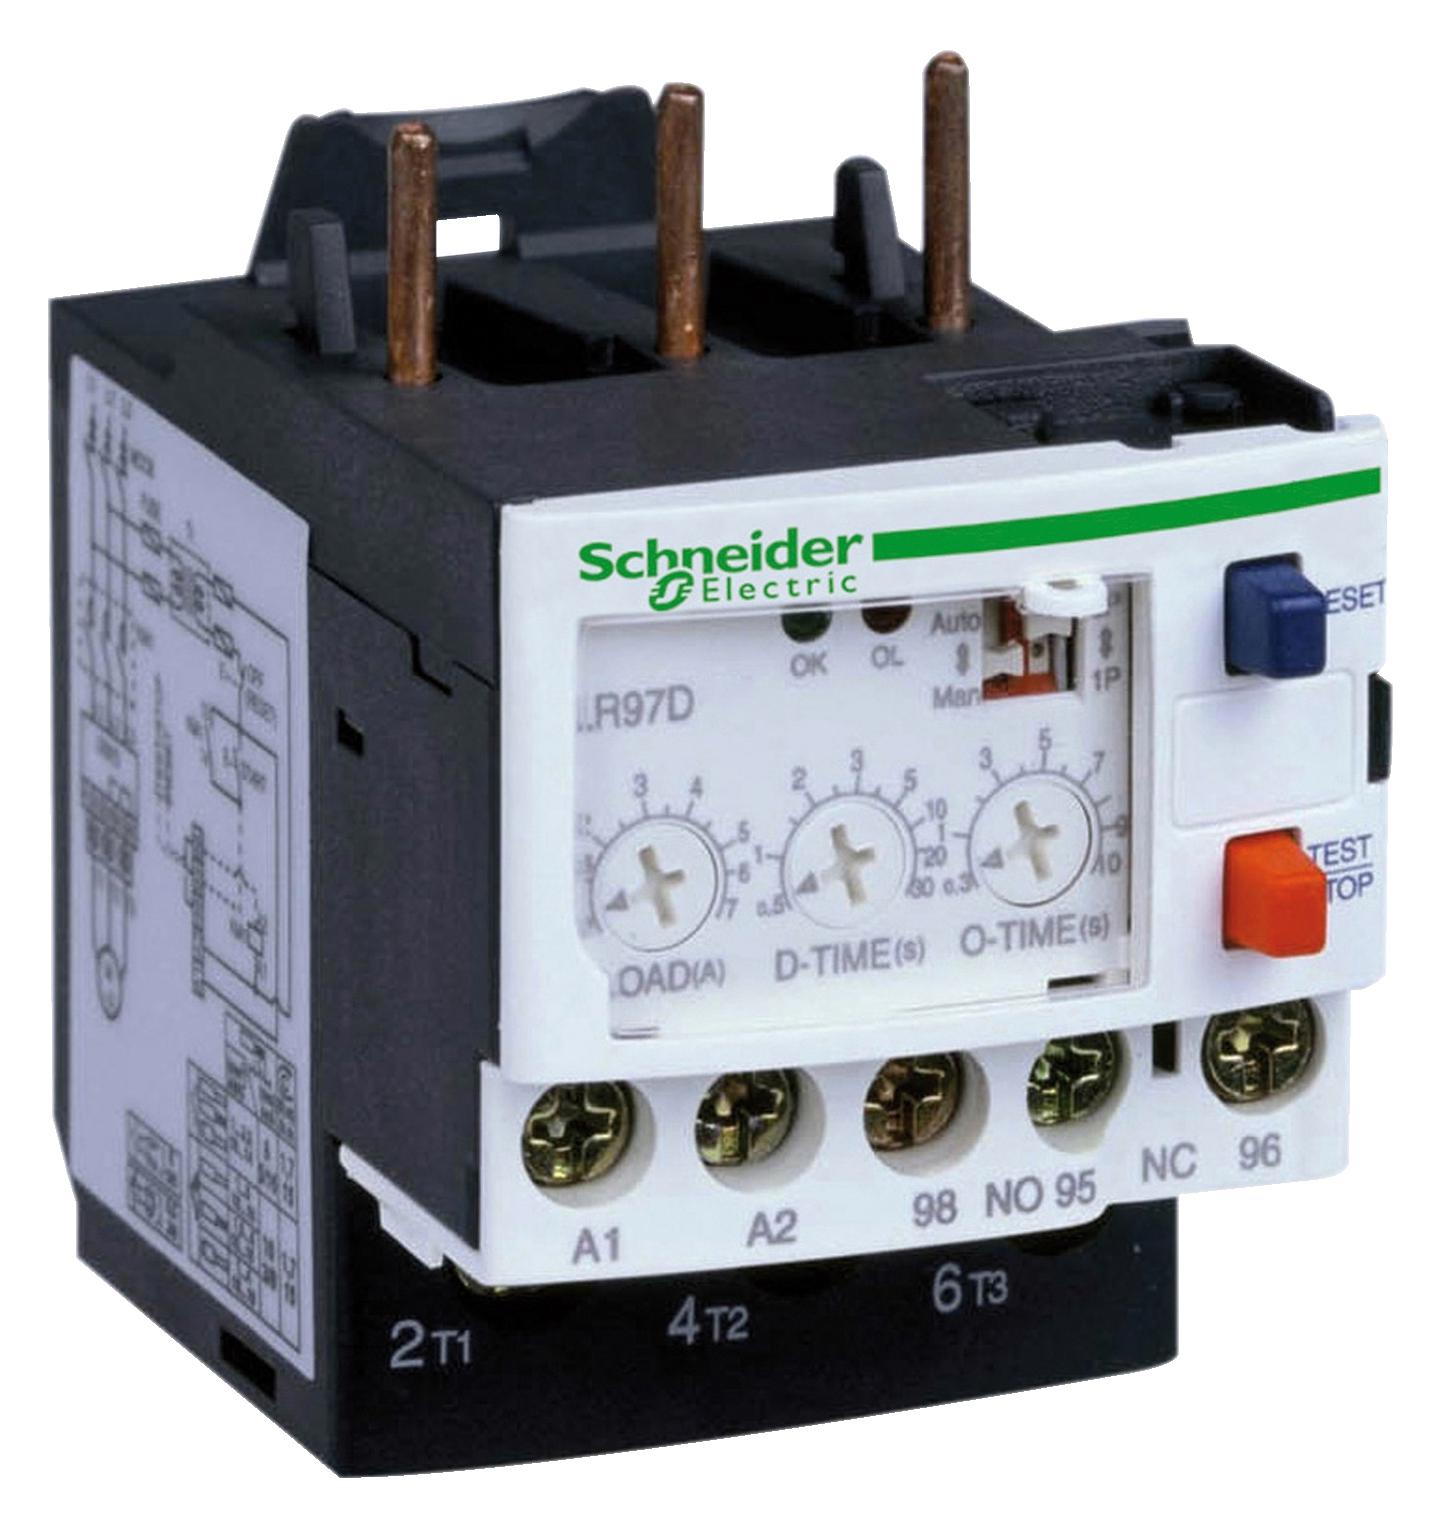 LR97D07B ELECTRONIC OVERLOAD RELAY, 7A, 24VDC SCHNEIDER ELECTRIC